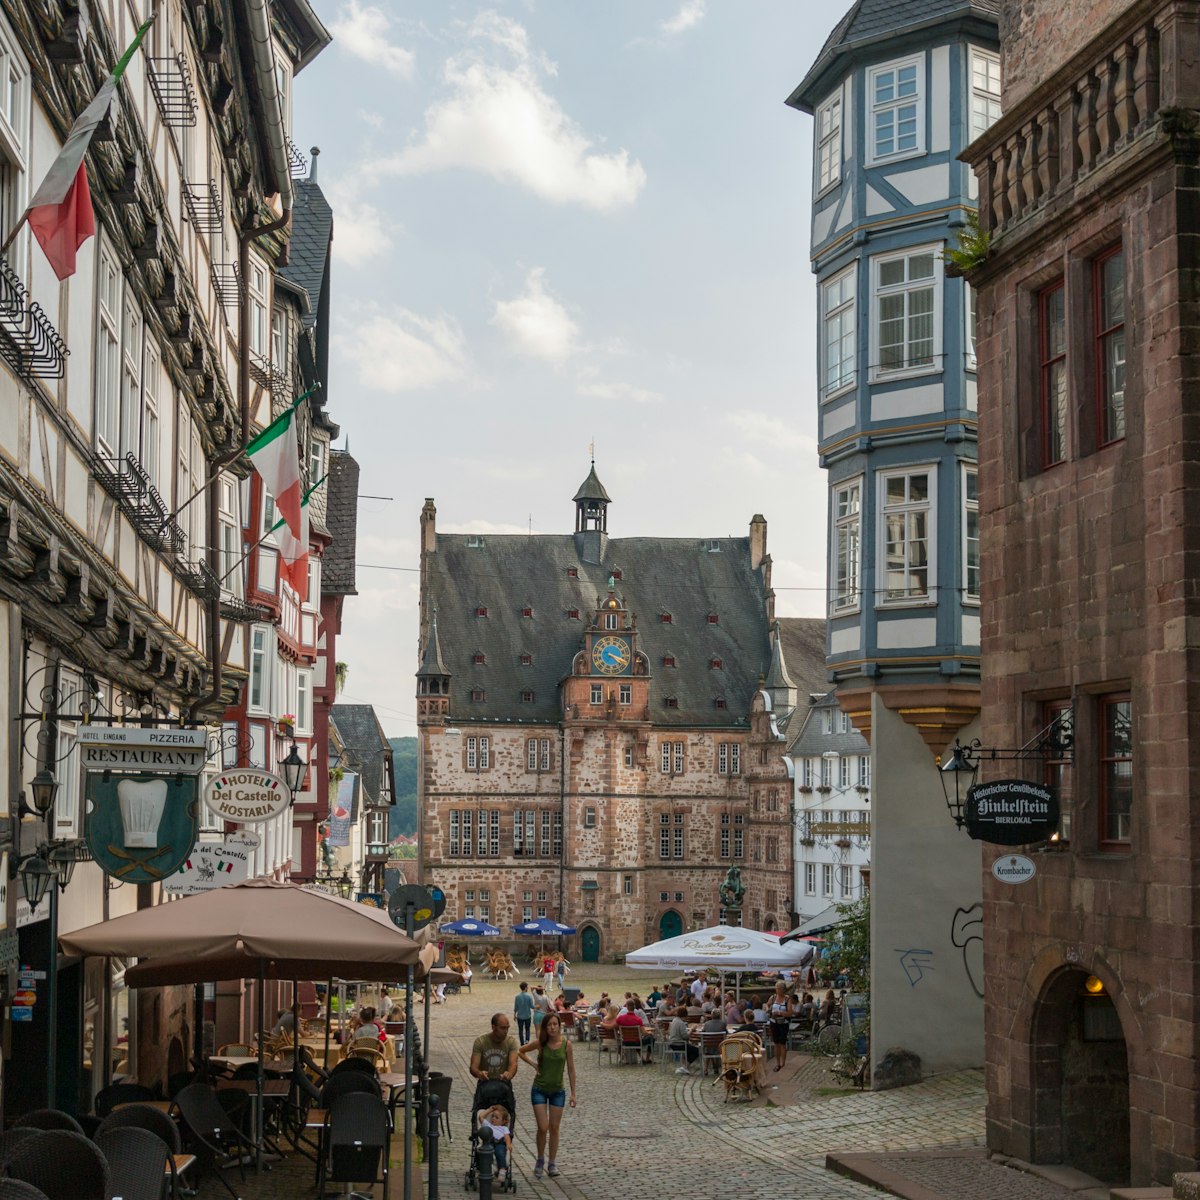 The historical townhall and market place of Marburg, Germany.